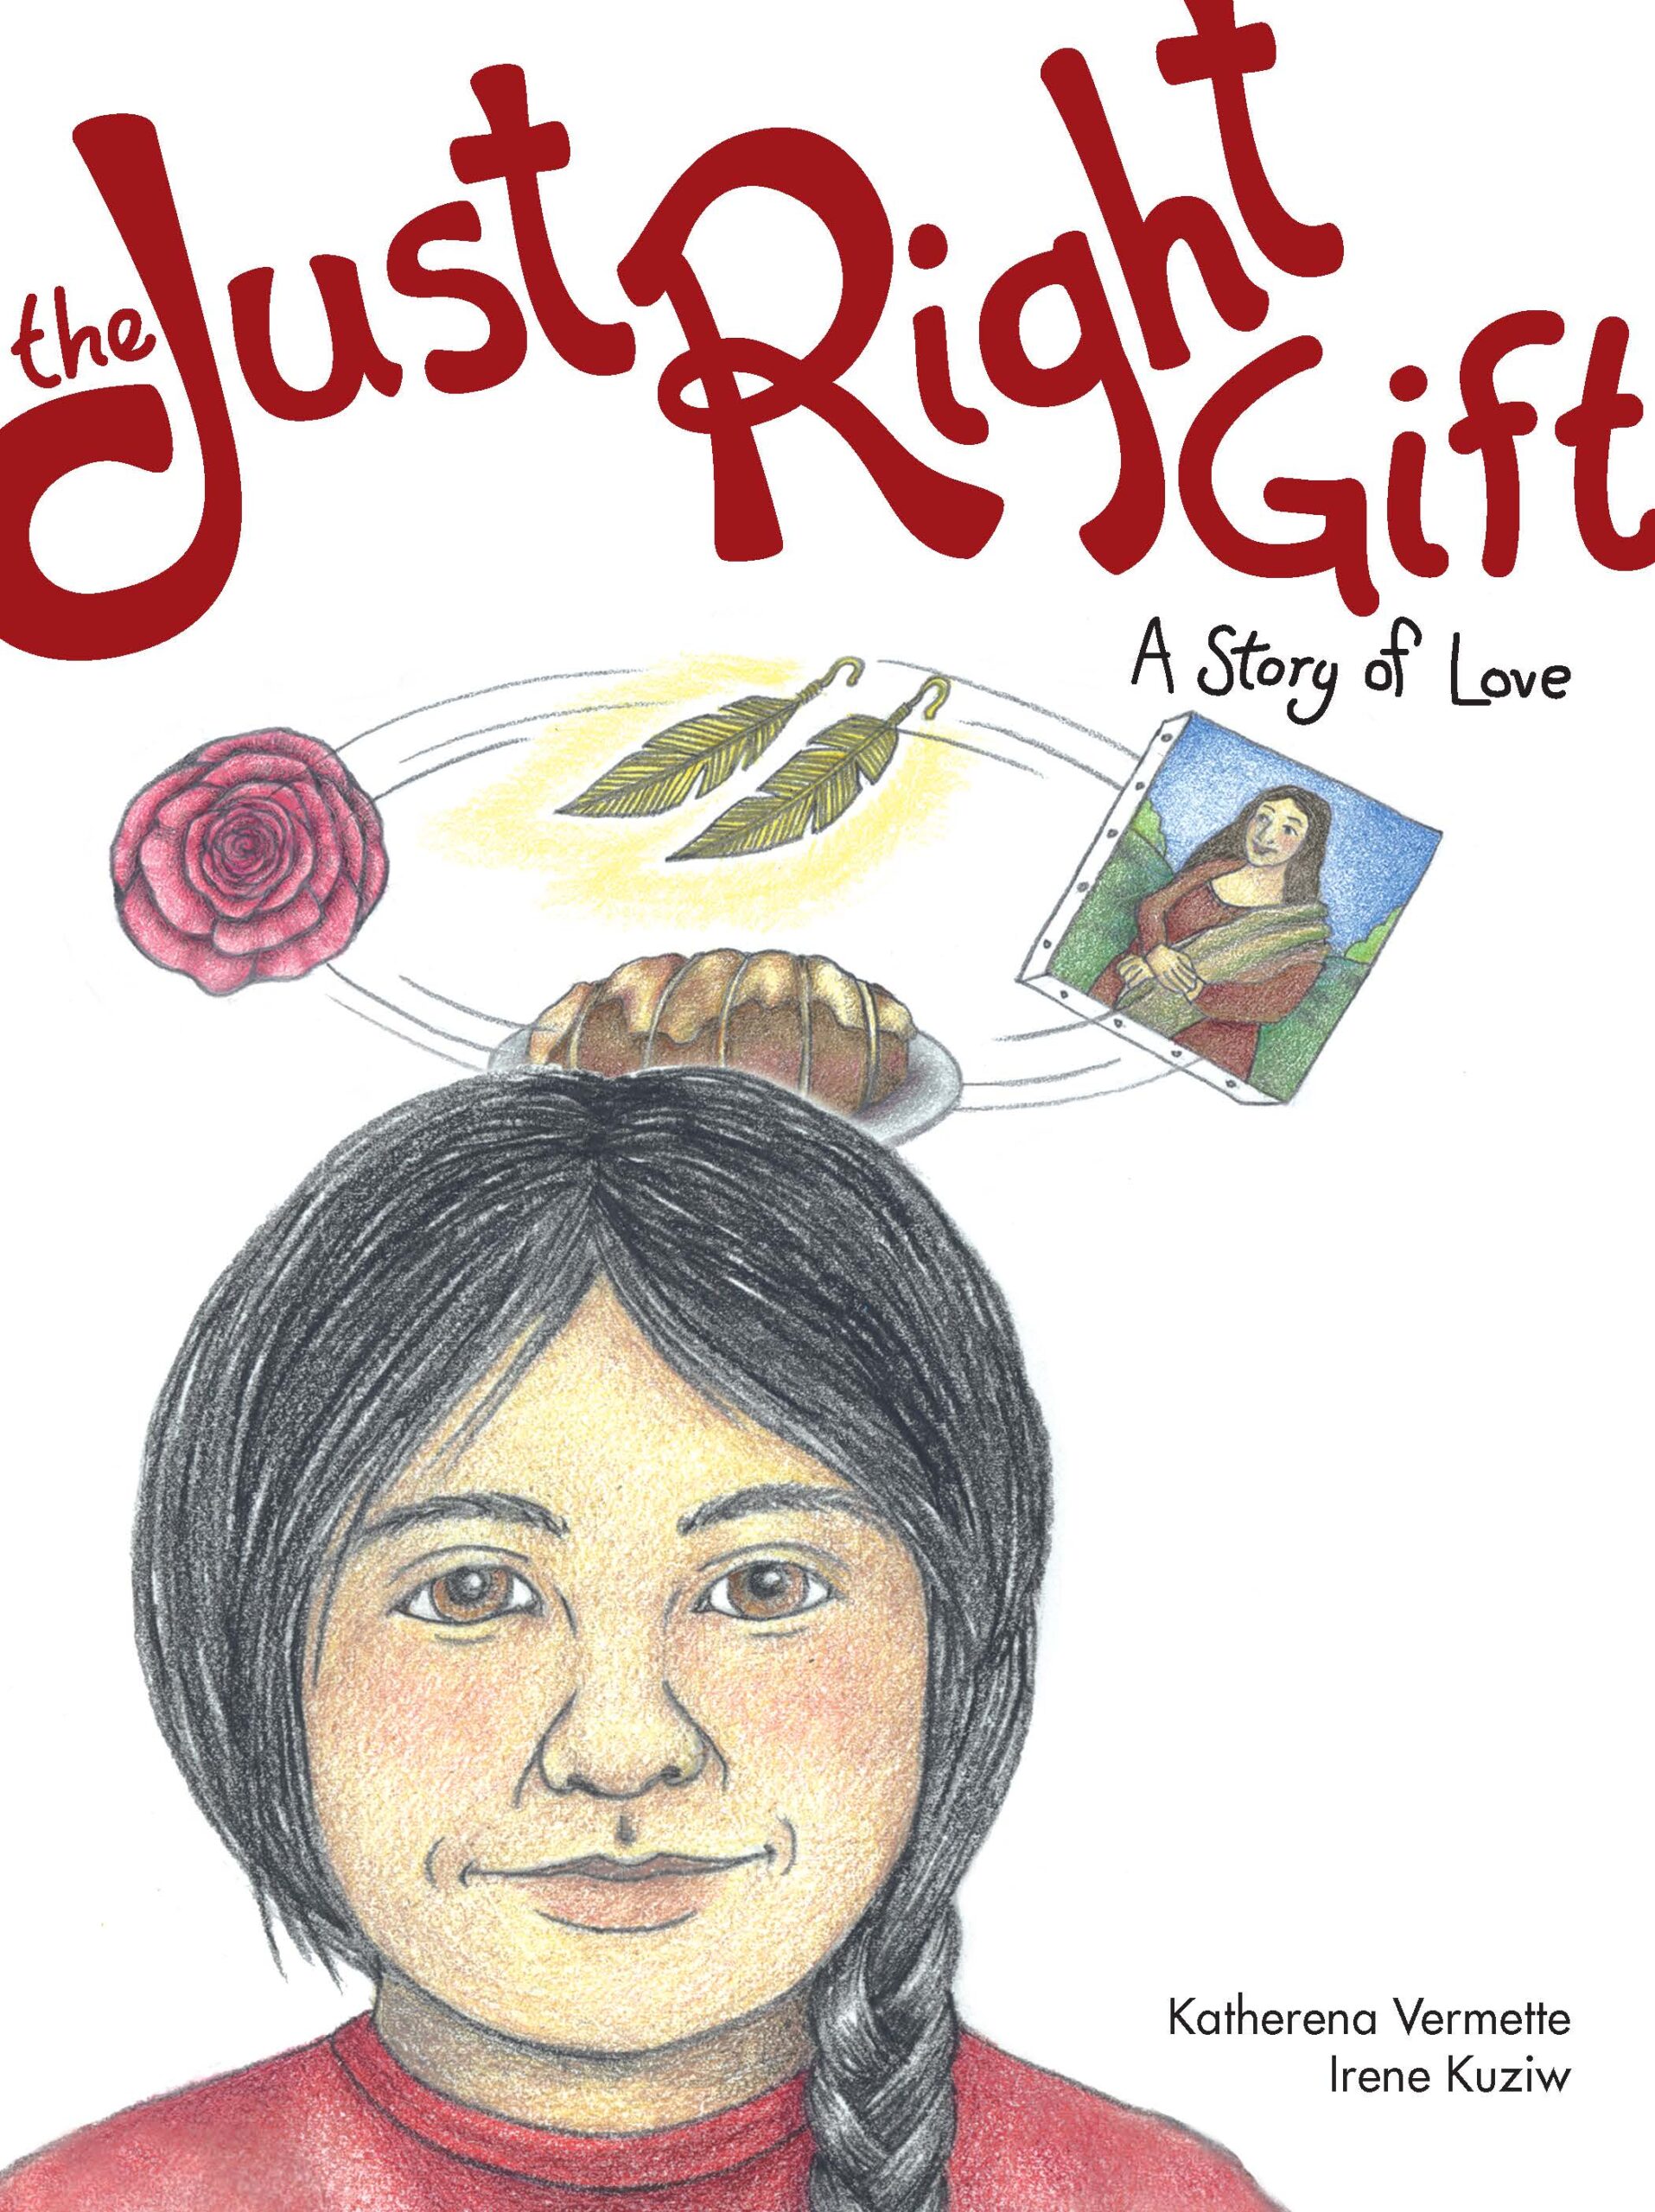 The book cover for The Just Right Gift: A Story of Love by Katherena Vermette.